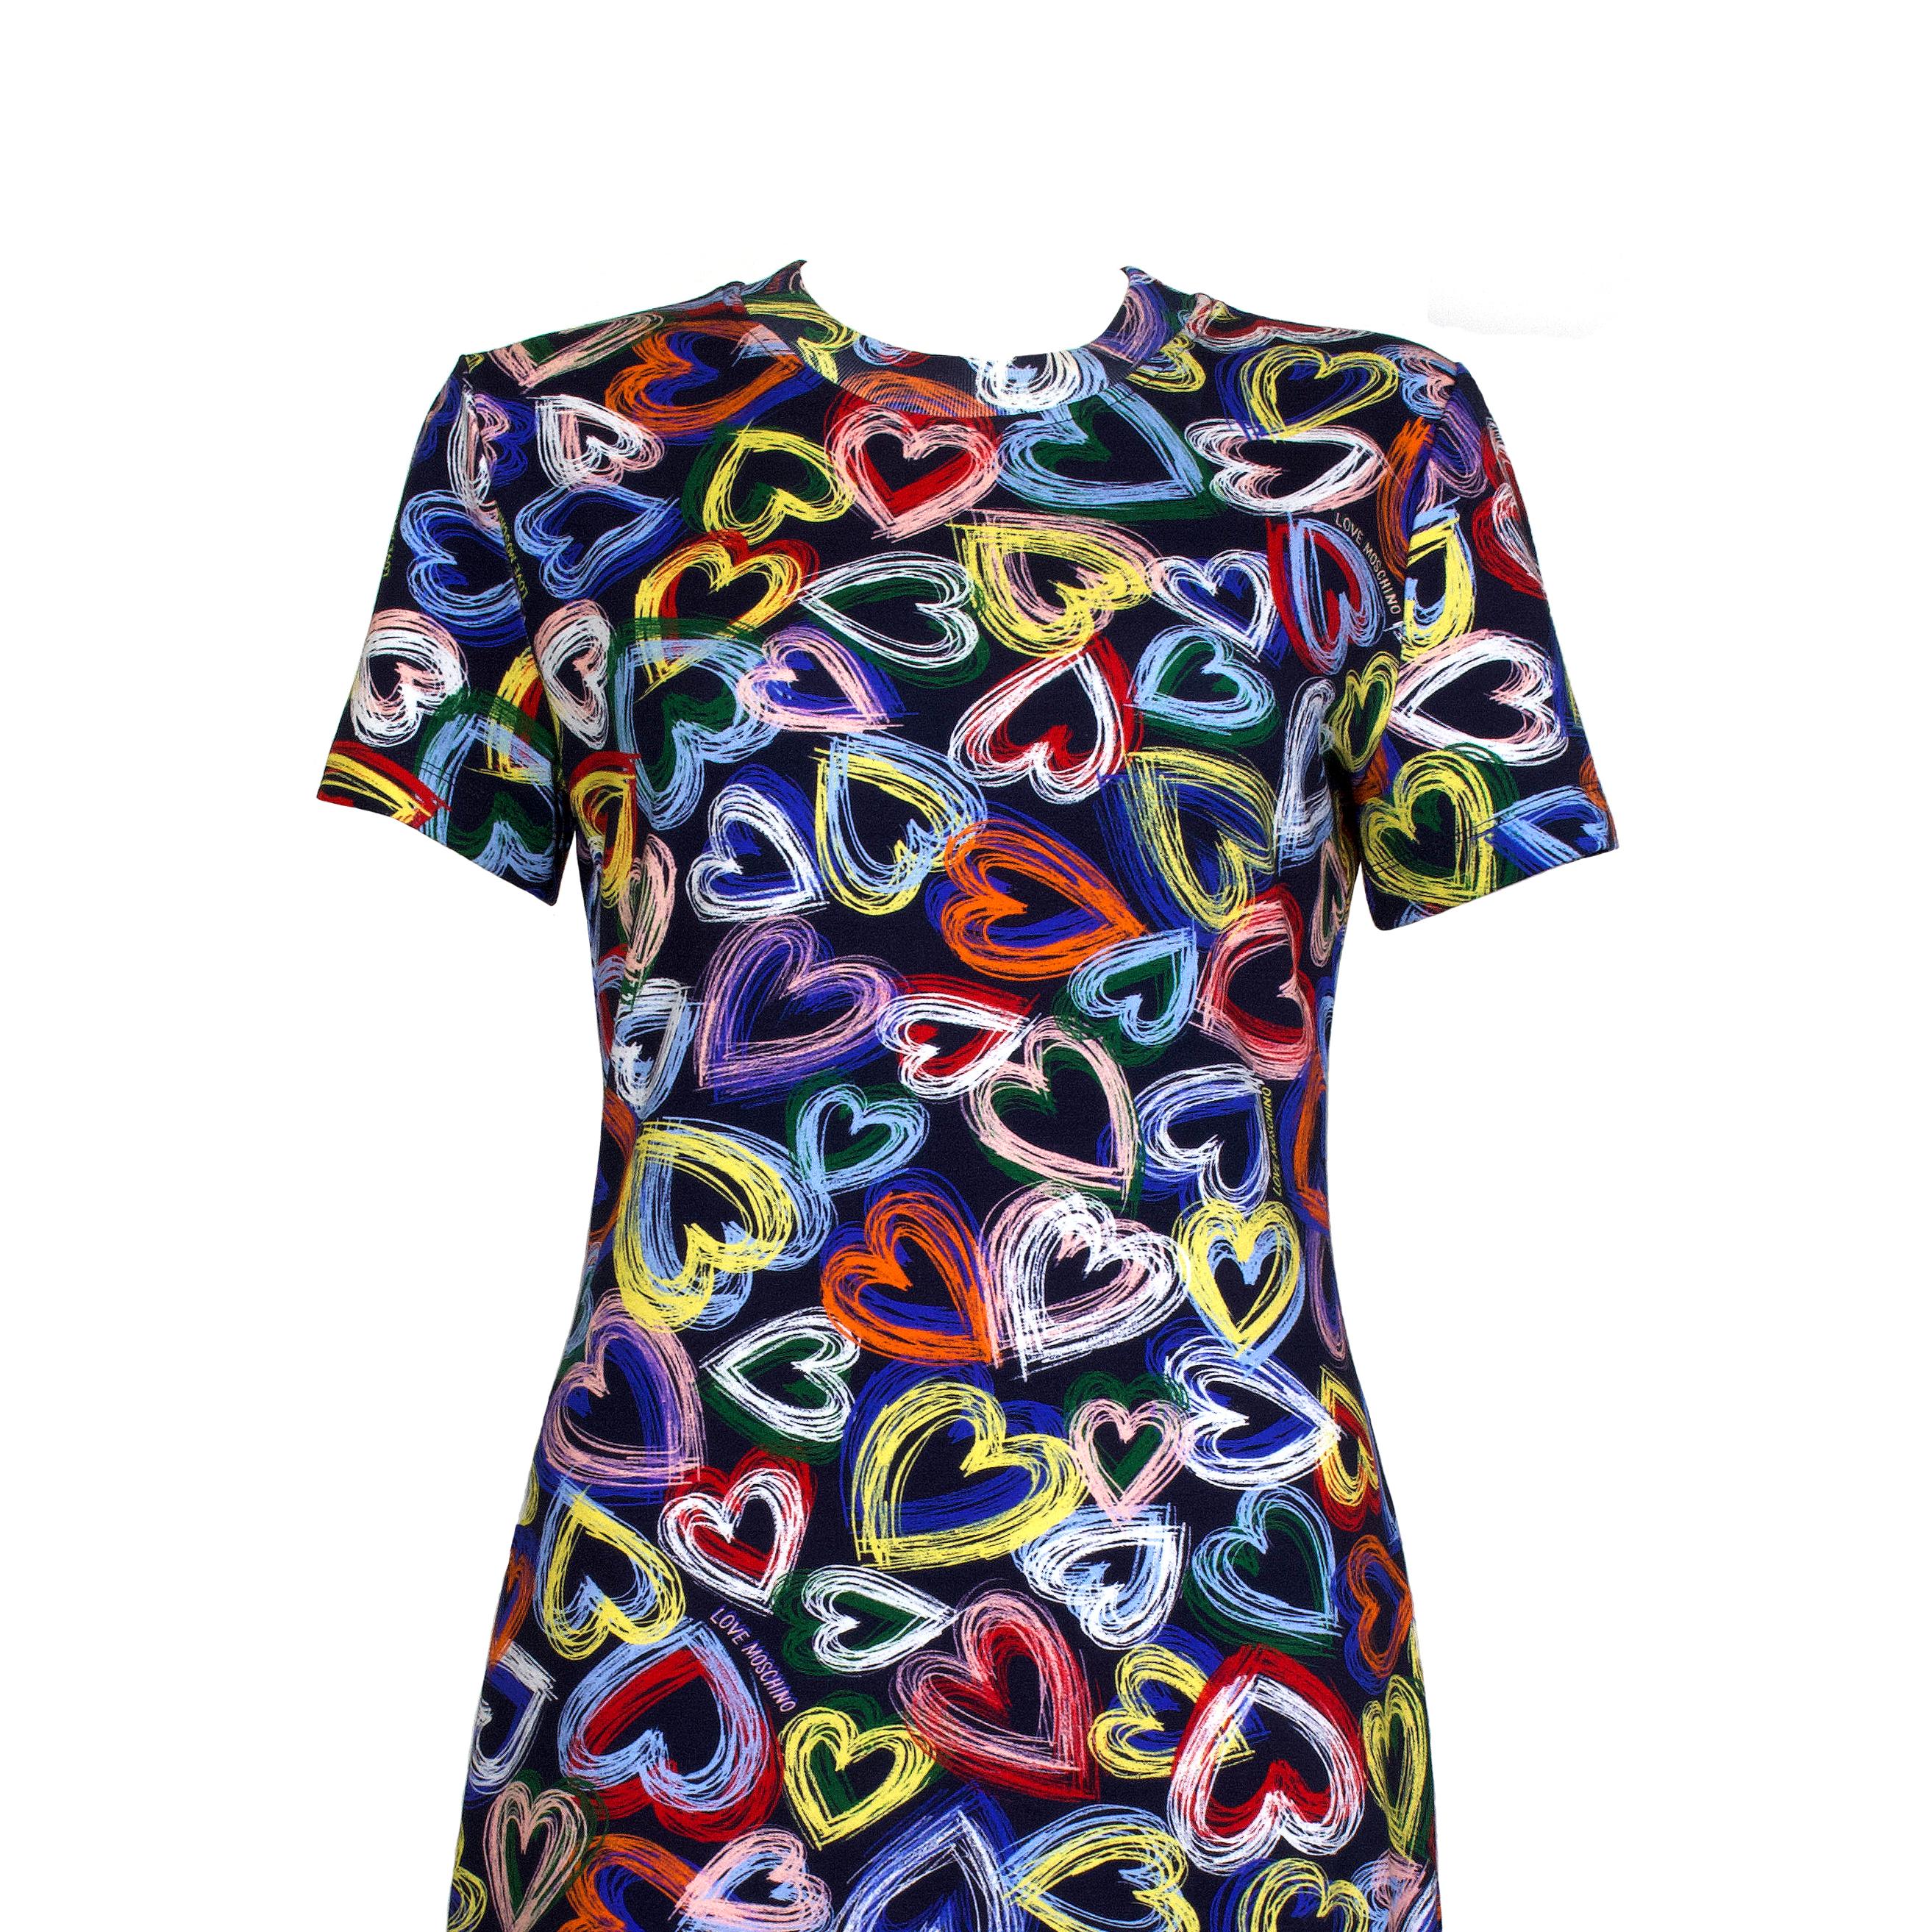 Product Details: Love Moschino - ‘Multi Heart’ Dress - Navy Blue / Orange, Yellow, Red, Pink, Pale Blue, Green ‘Heart + Love Moschino’ Print -  Ribbed Neckline Detail - NEW With Tags
Label: Love Moschino
Fabric Content: Cotton Elastane Mix - Navy